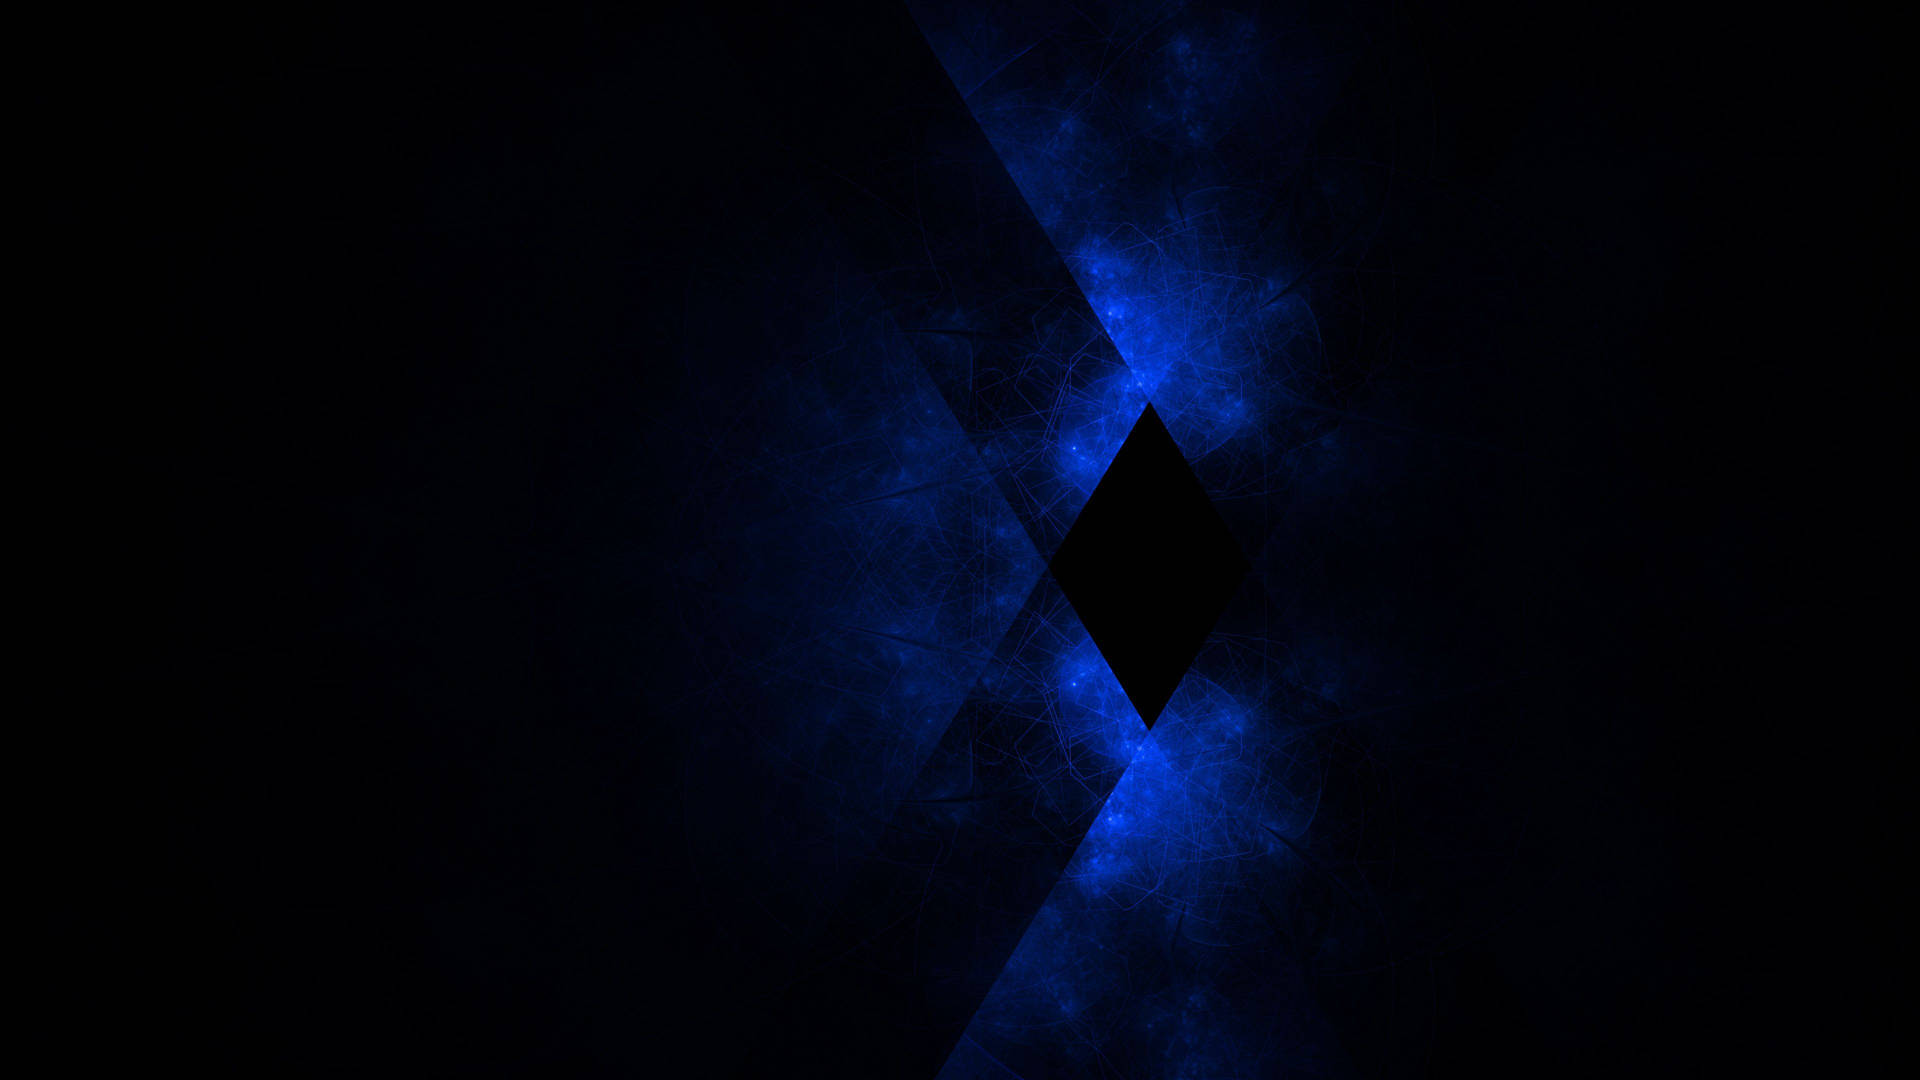 Black Backgrounds Wallpapers - Wallpaper Cave